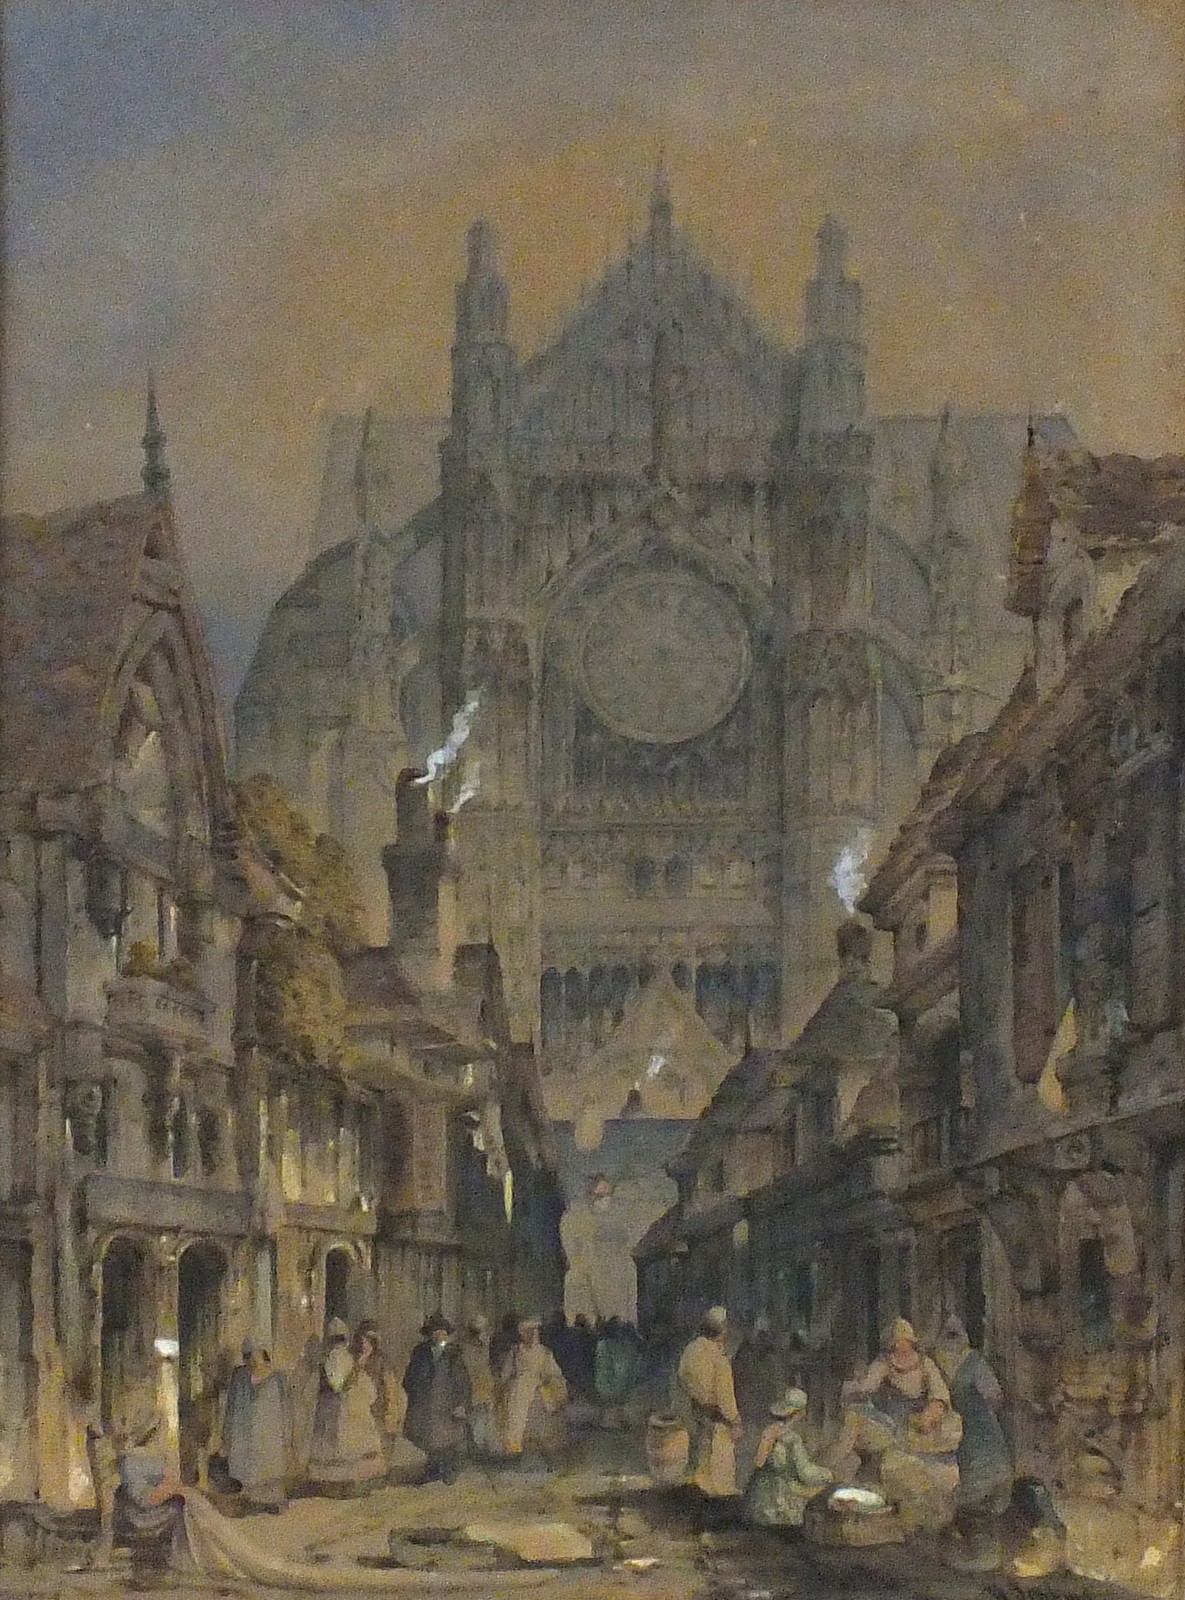 H JENKINS (British Fl. 1854-1872) Beavias - streets leading to the cathedral, Watercolour, Signed